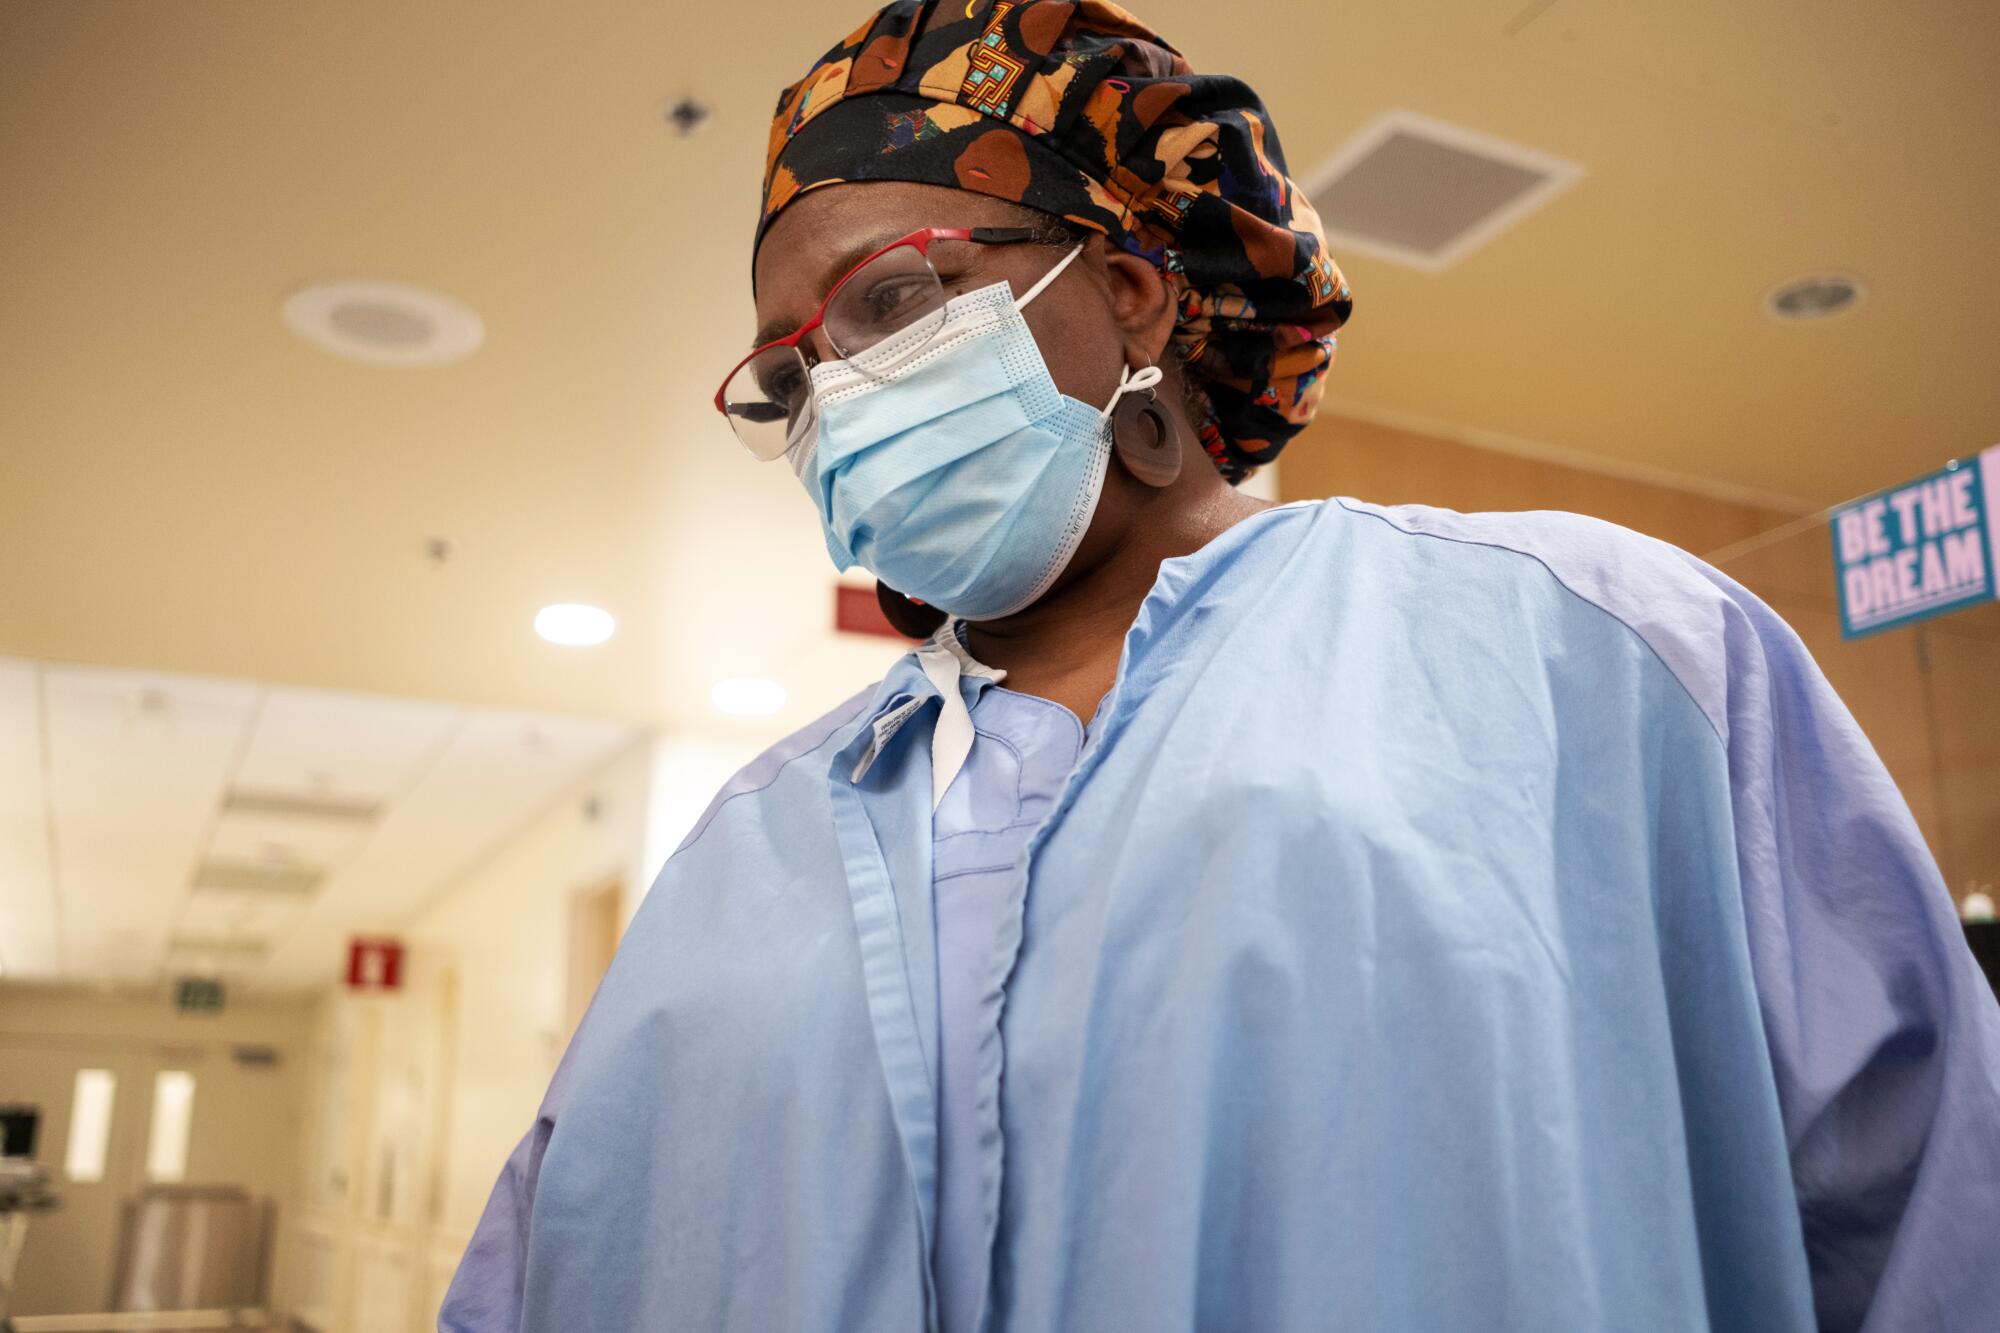 A woman in nursing scrubs and a surgical mask.